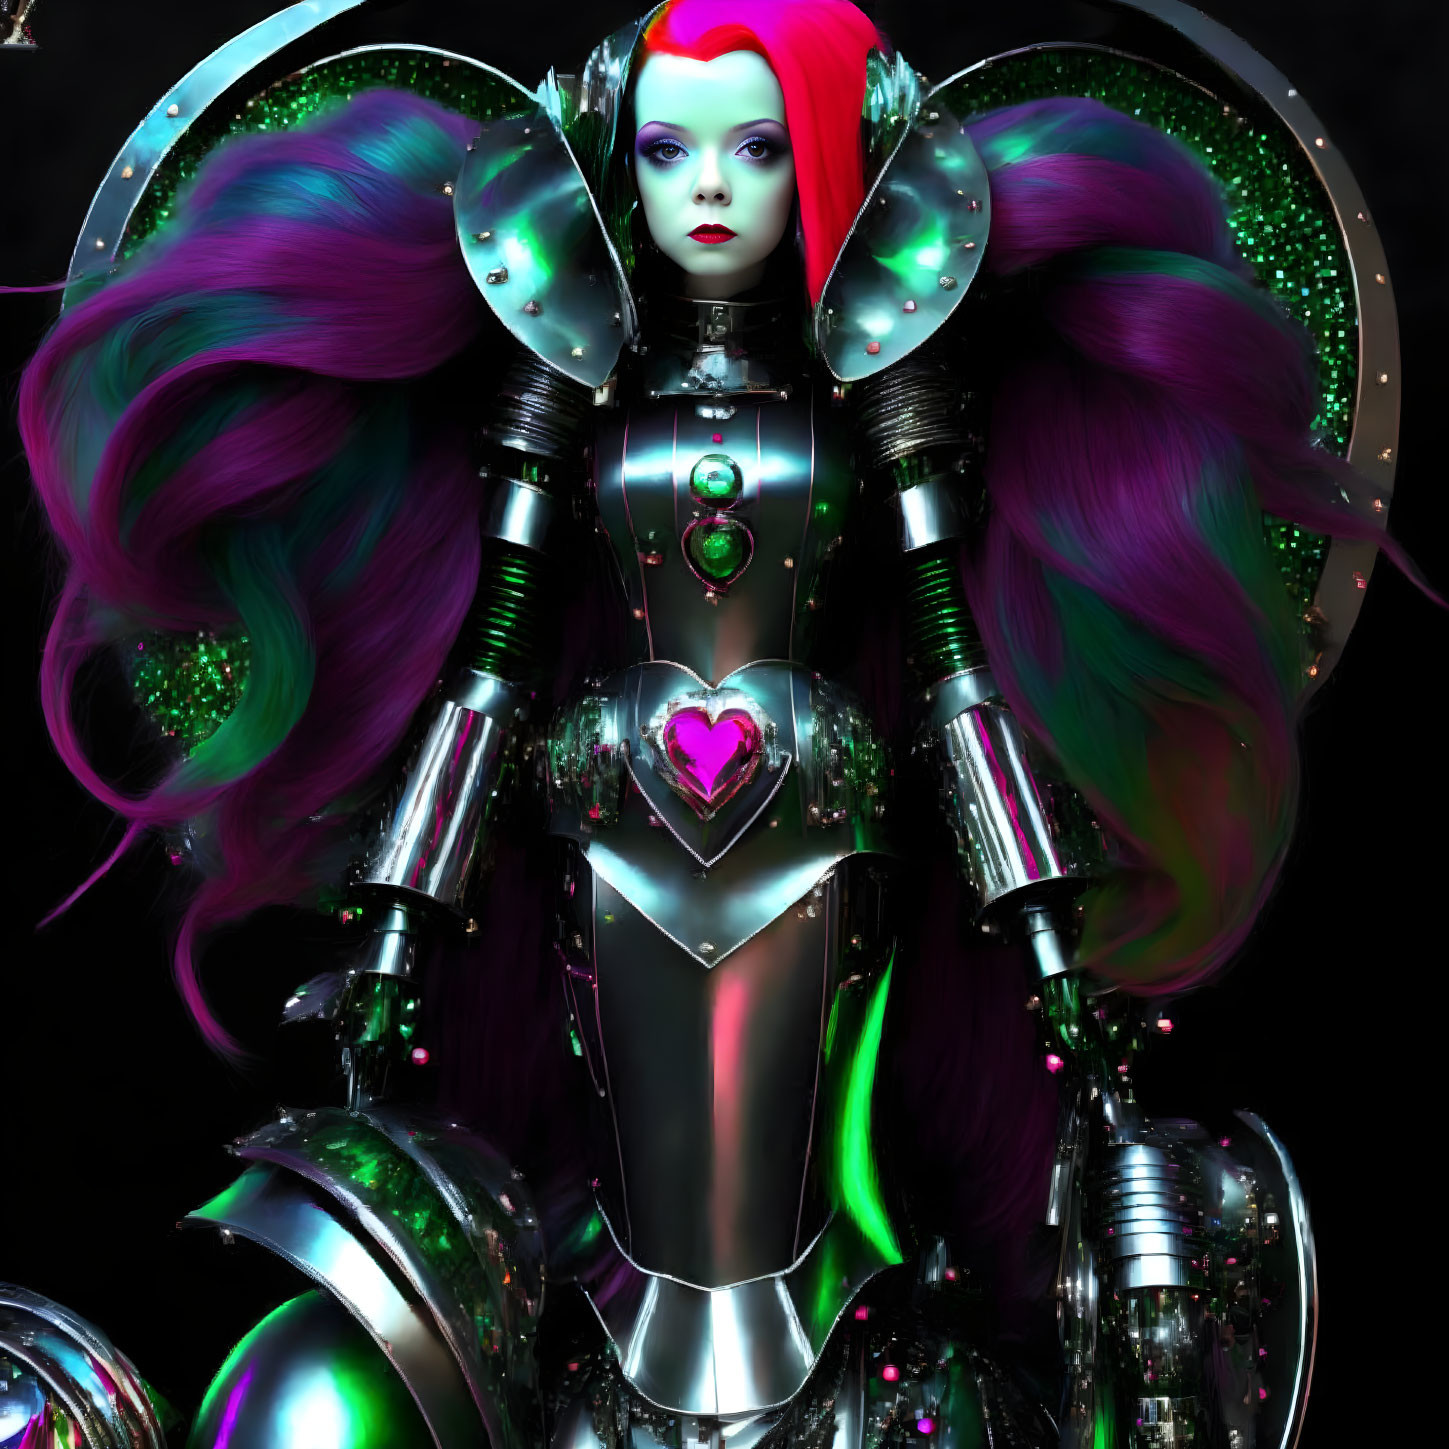 Futuristic Female Robot in Iridescent Armor with Purple Hair and Heart Emblem